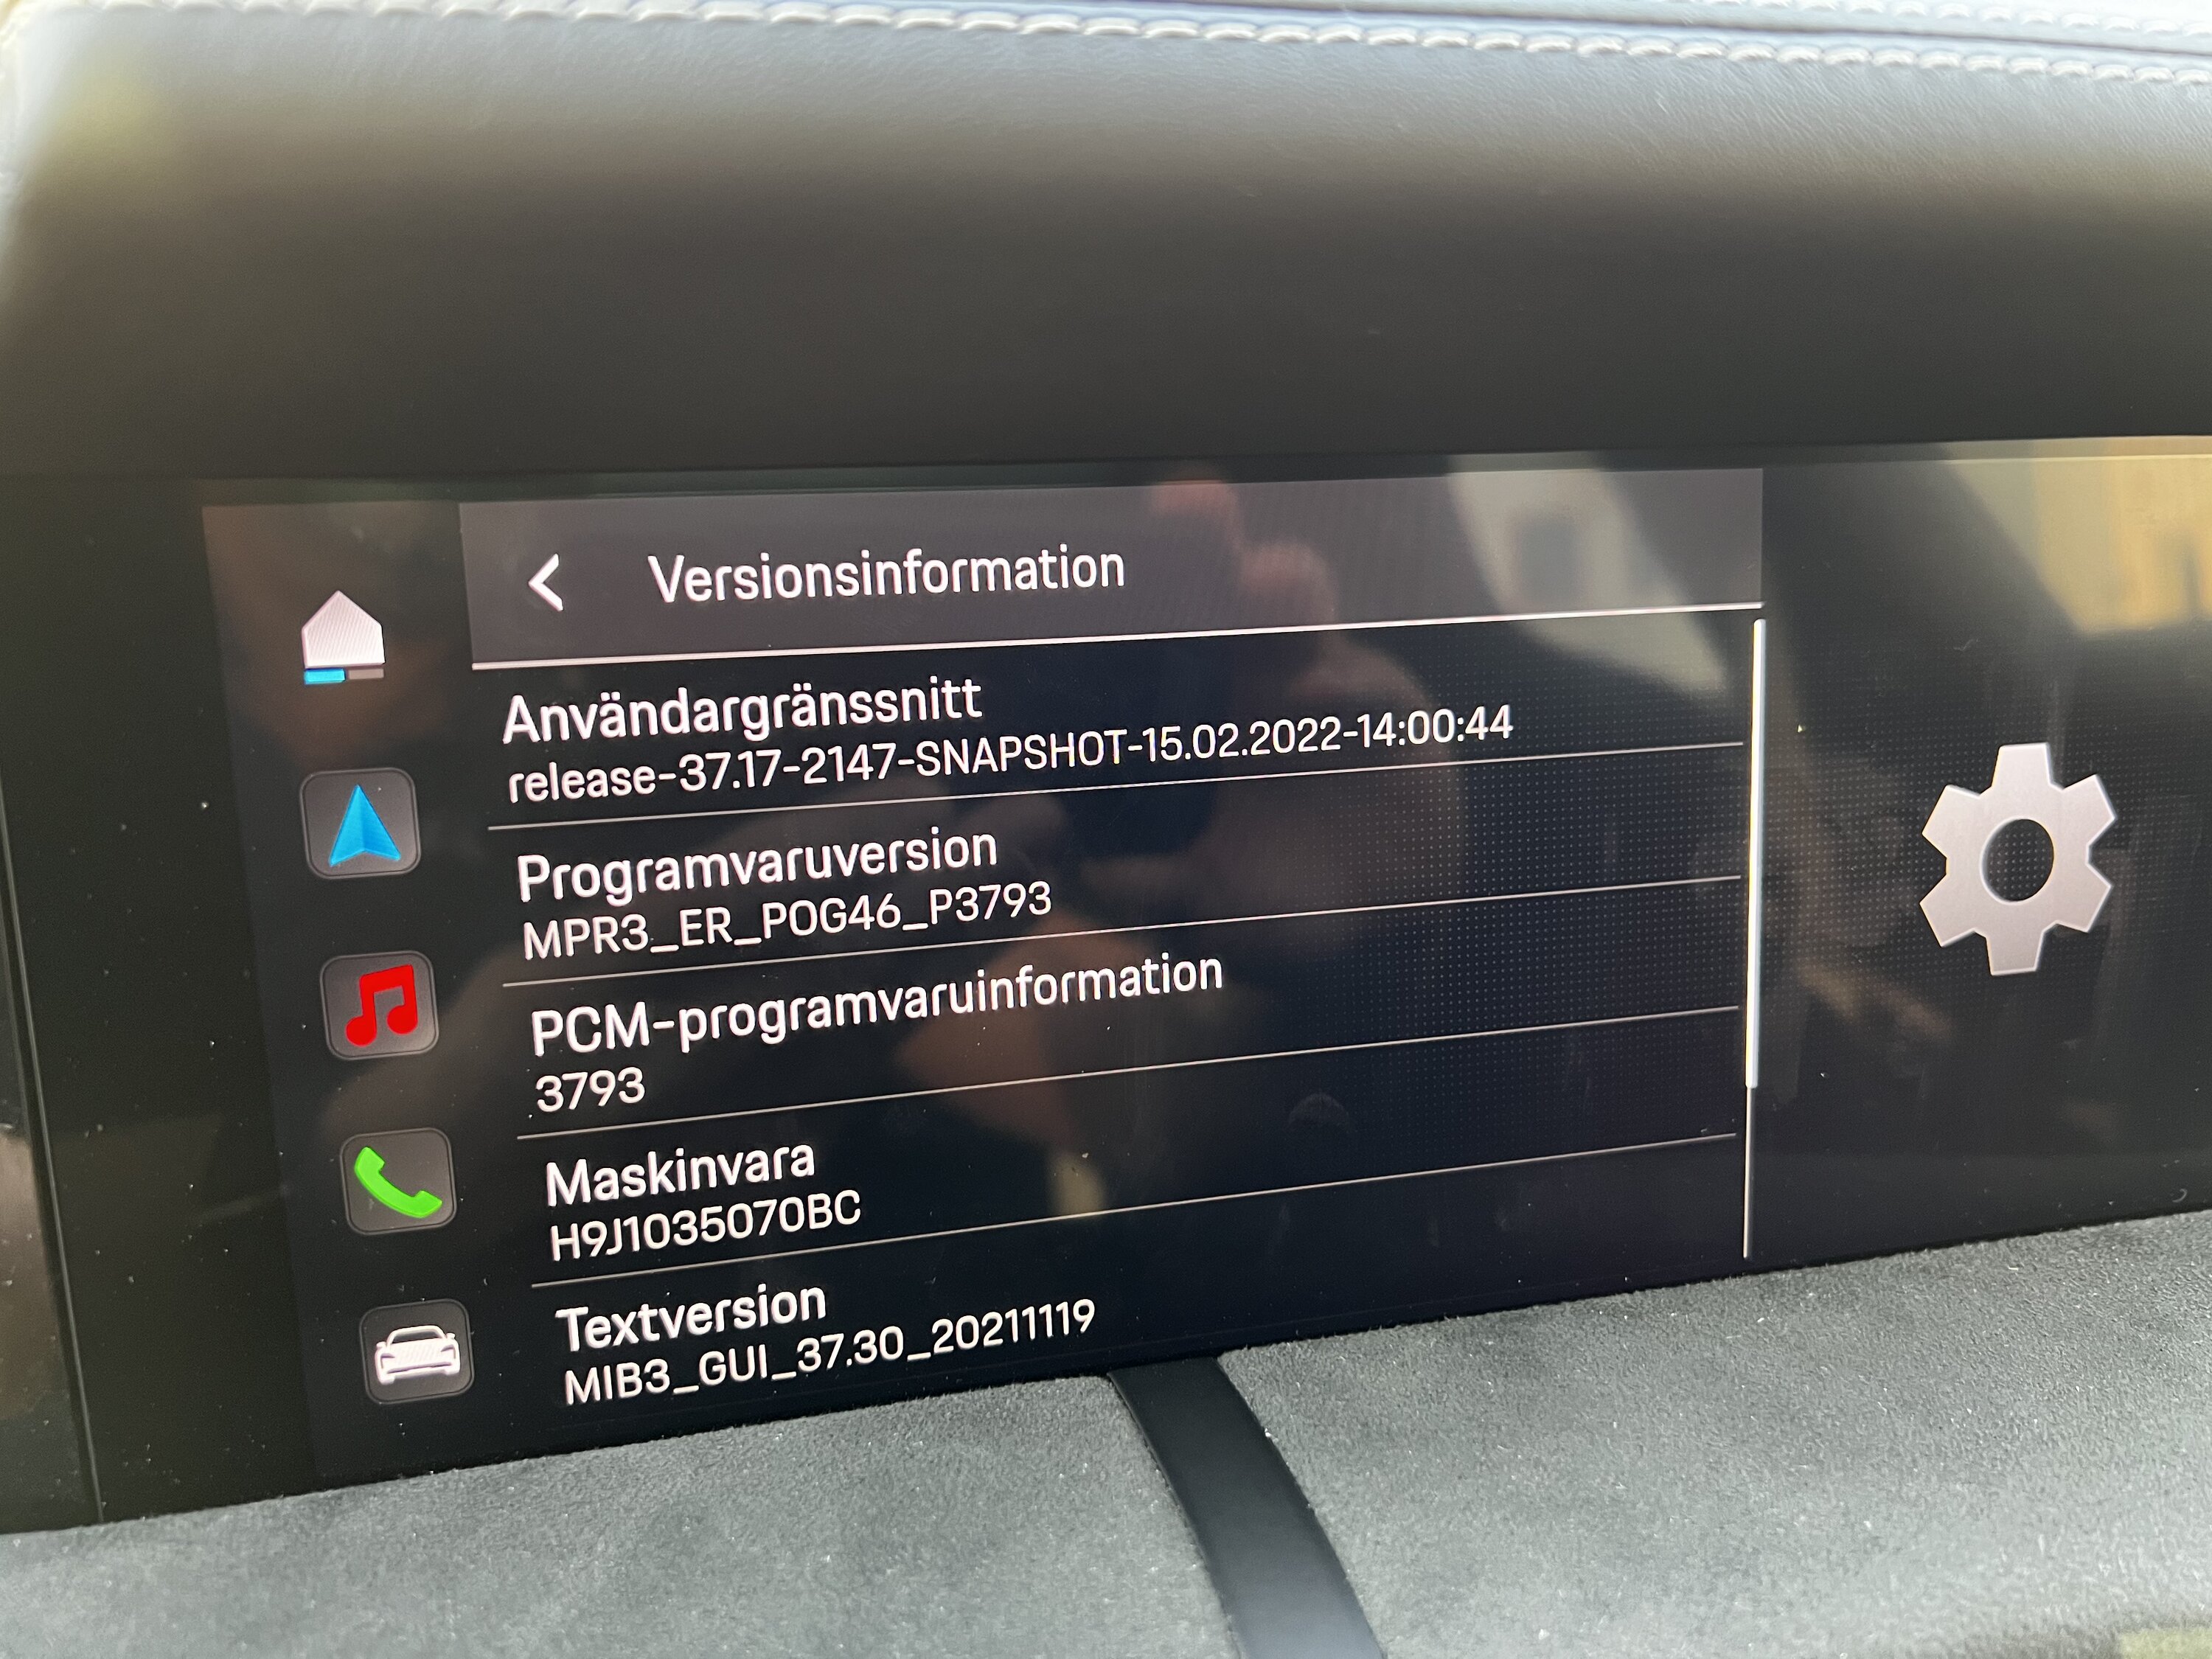 Porsche Taycan Official Porsche Announcement: PCM Update Coming to All Model Years w/ Faster Charging, Infotainment Improvements and Range Bump 1FA6E6B3-E336-4399-9C30-7921190C0233